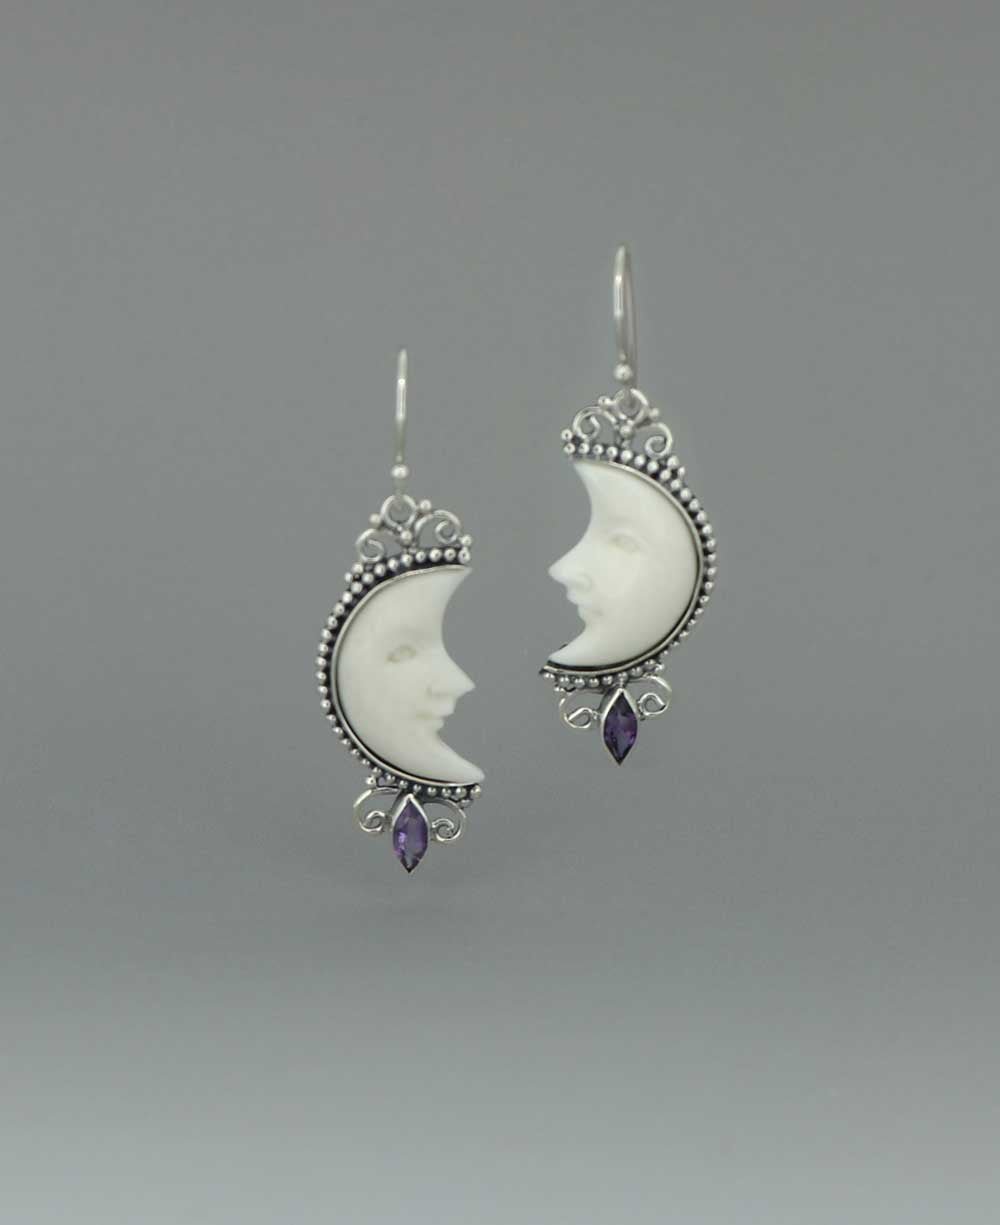 Bali-Crafted Sterling Silver Earrings with Carved Moon Face and Amethyst - Earrings